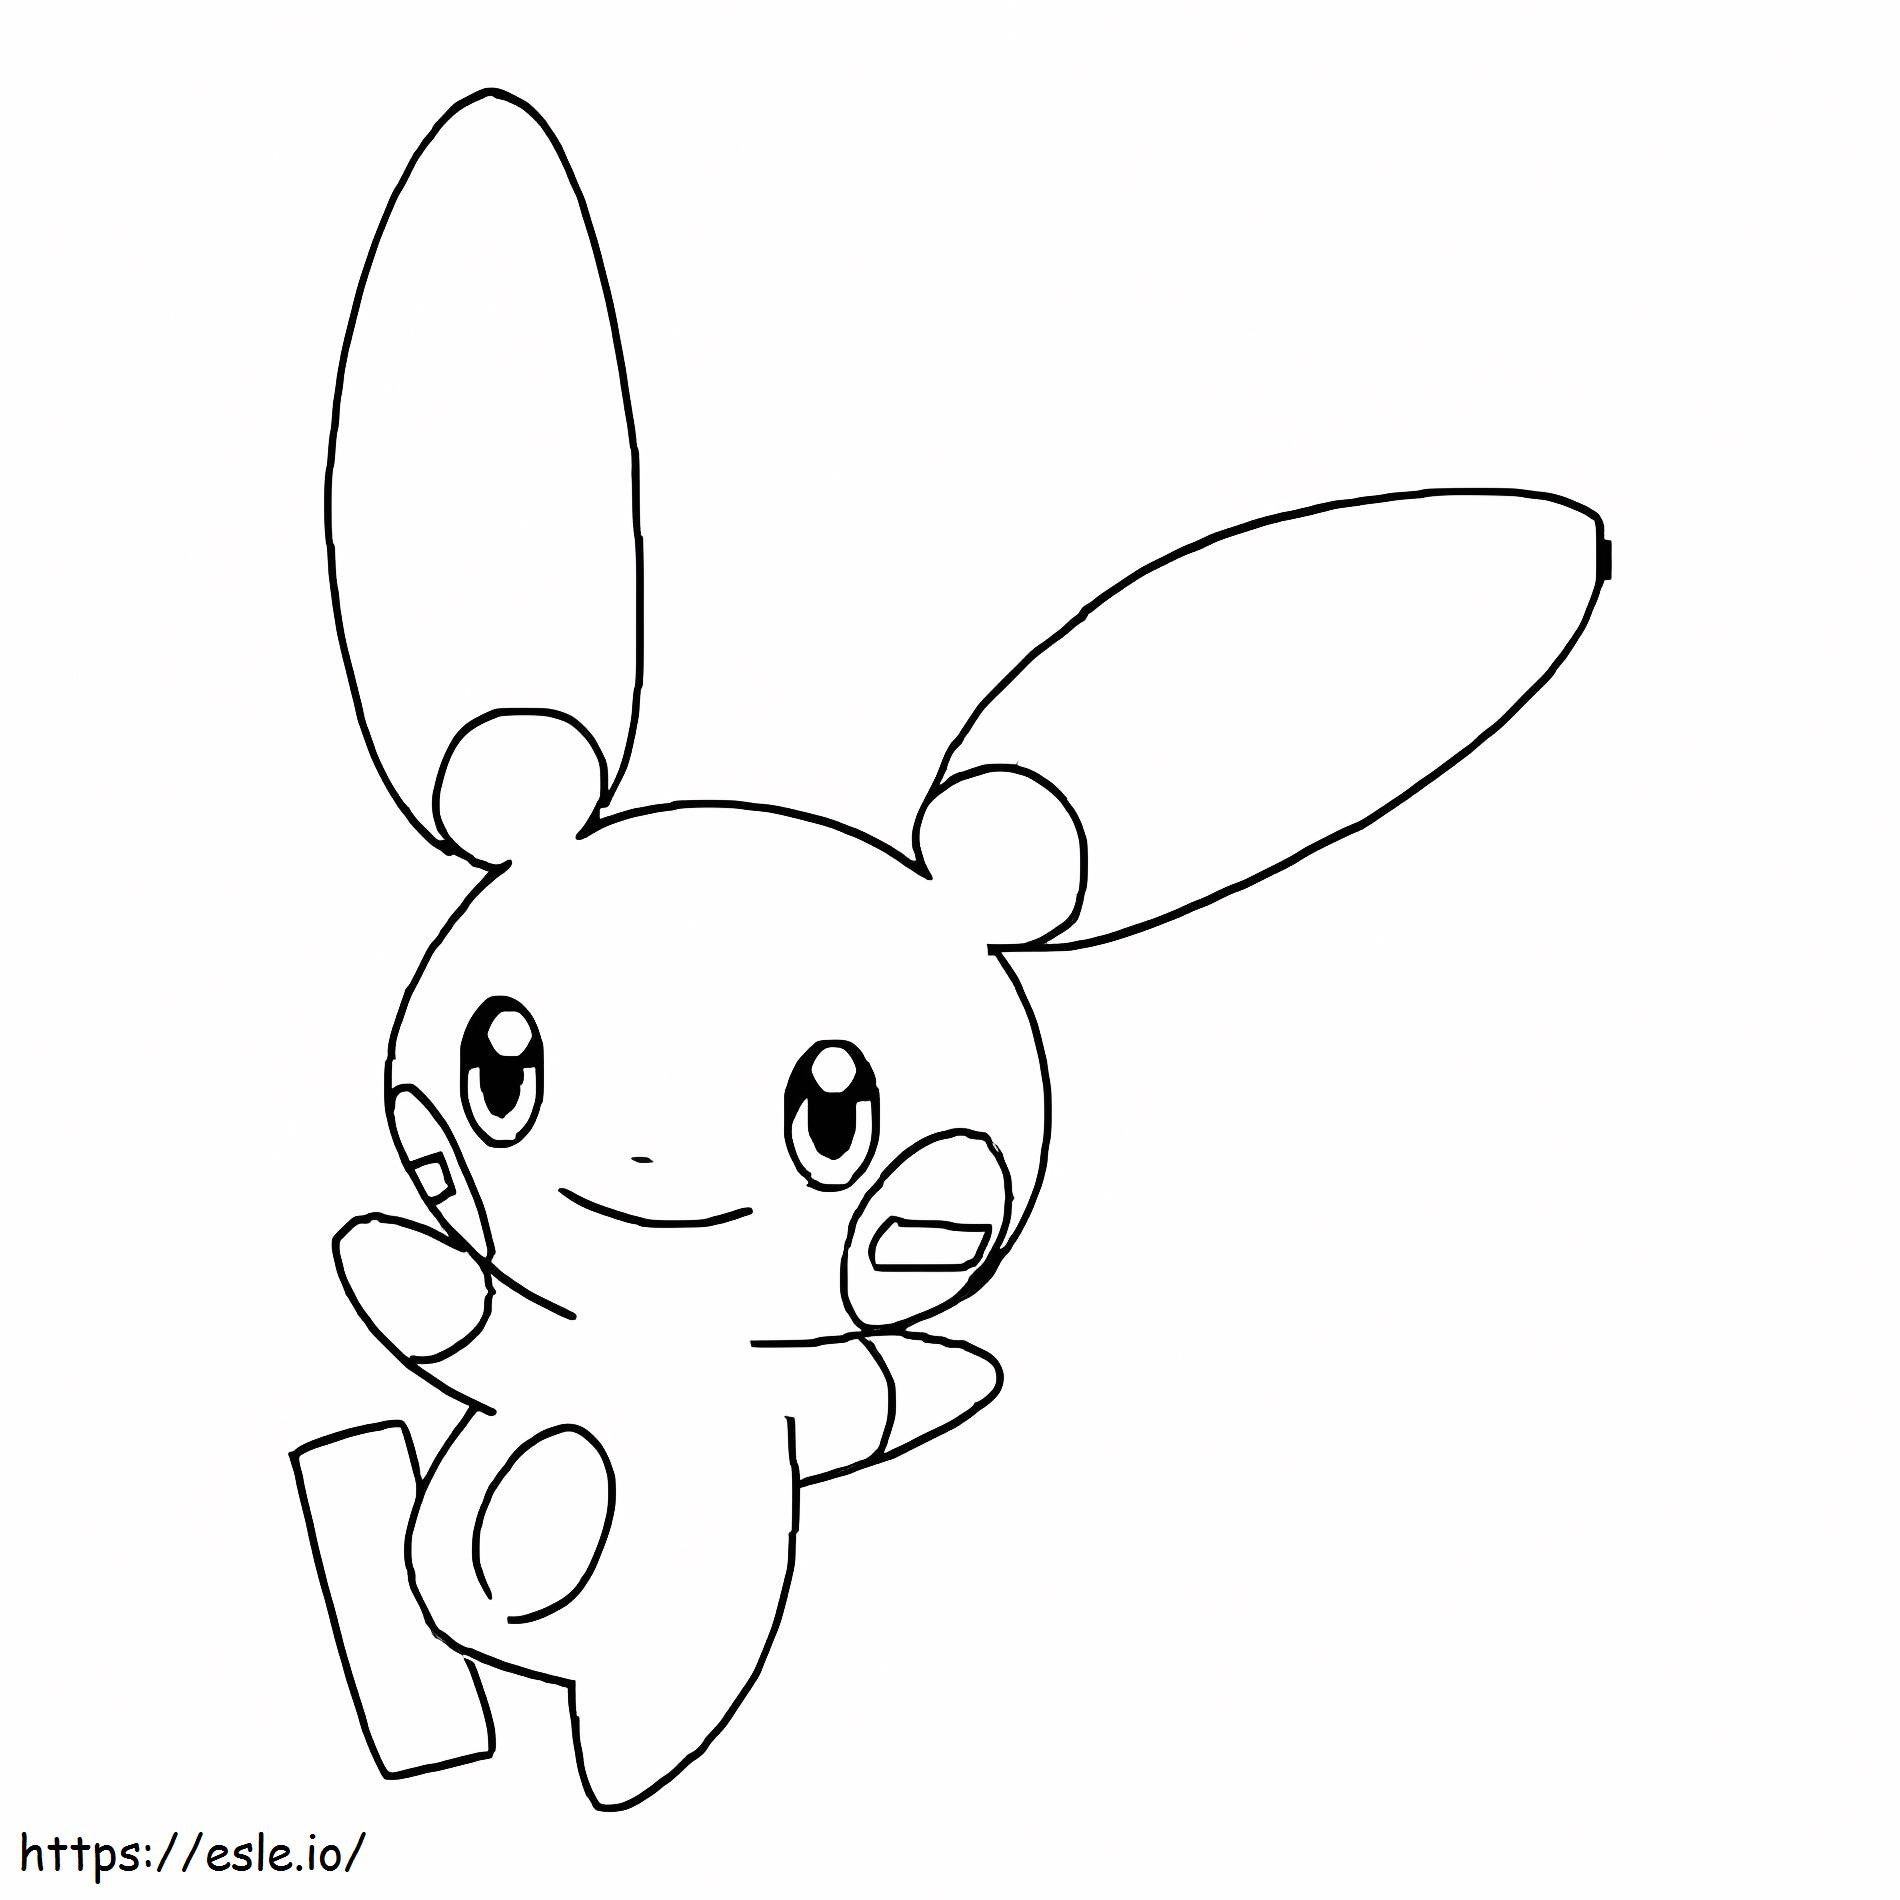 My Pokemon 3 coloring page